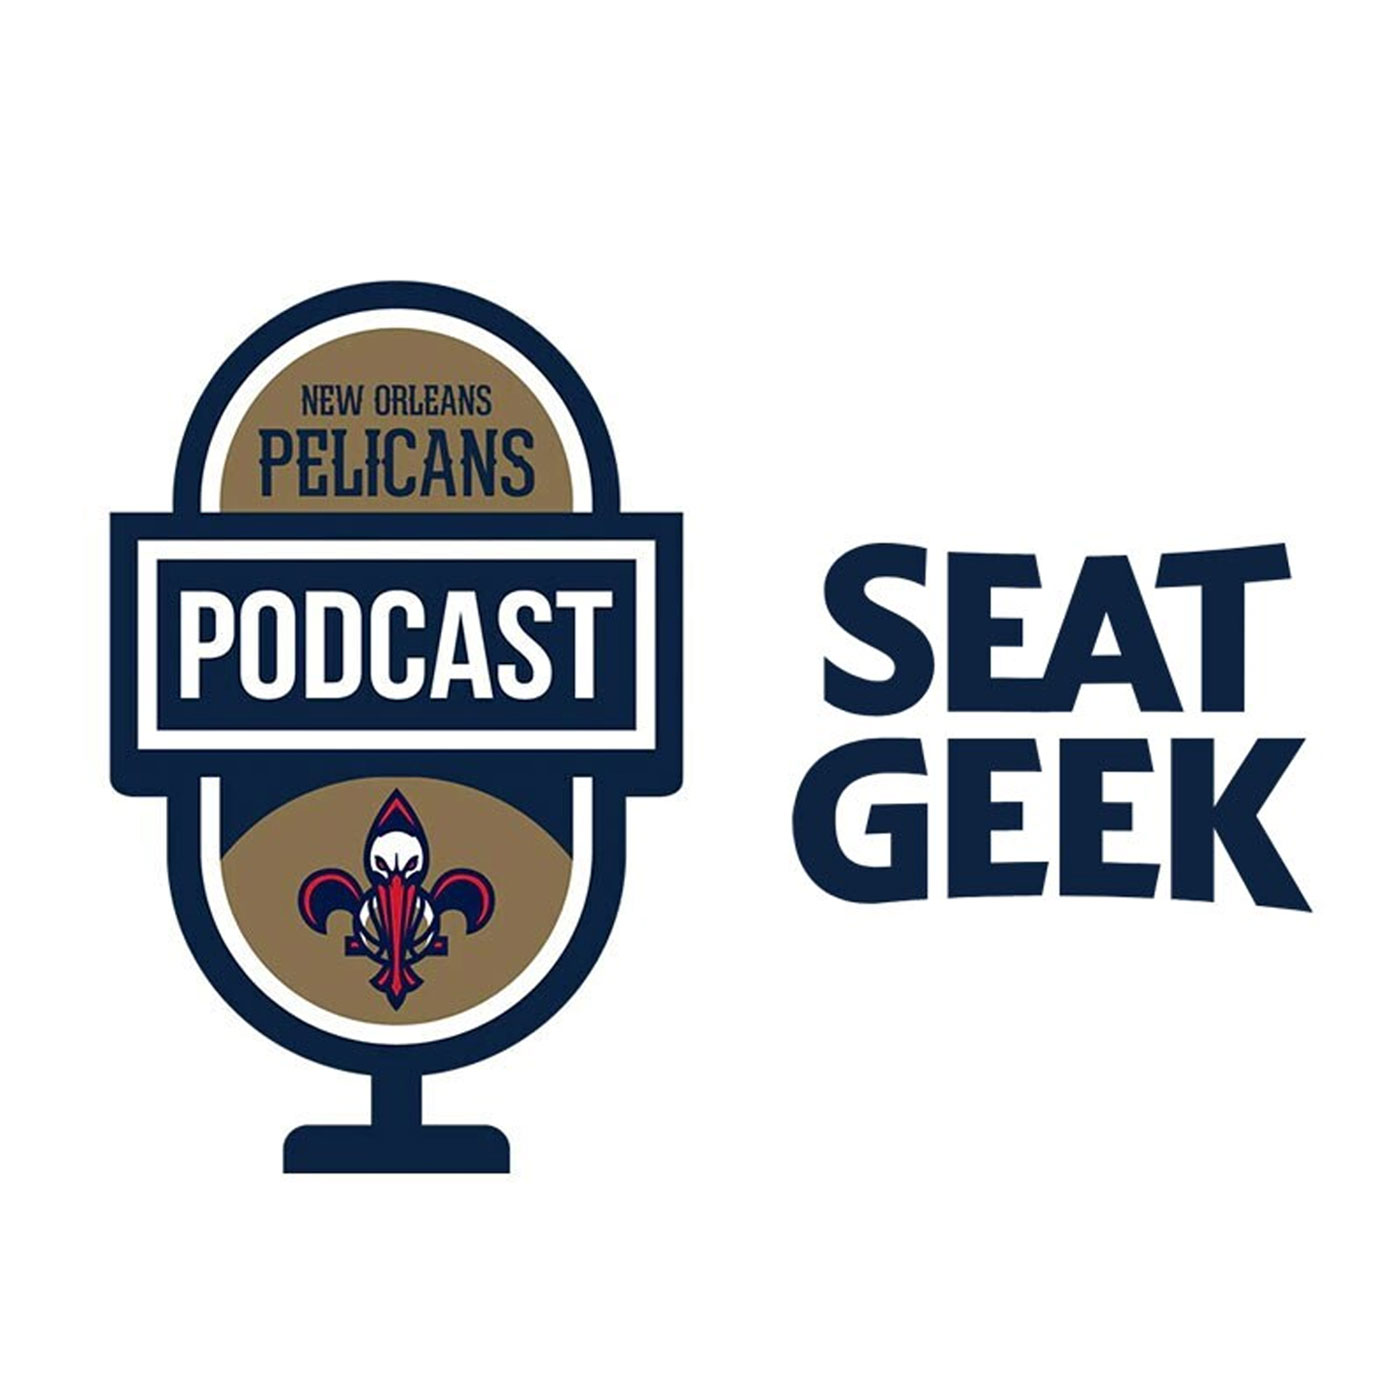 Will Guillory on the New Orleans Pelicans Podcast presented by SeatGeek - April 11, 2022